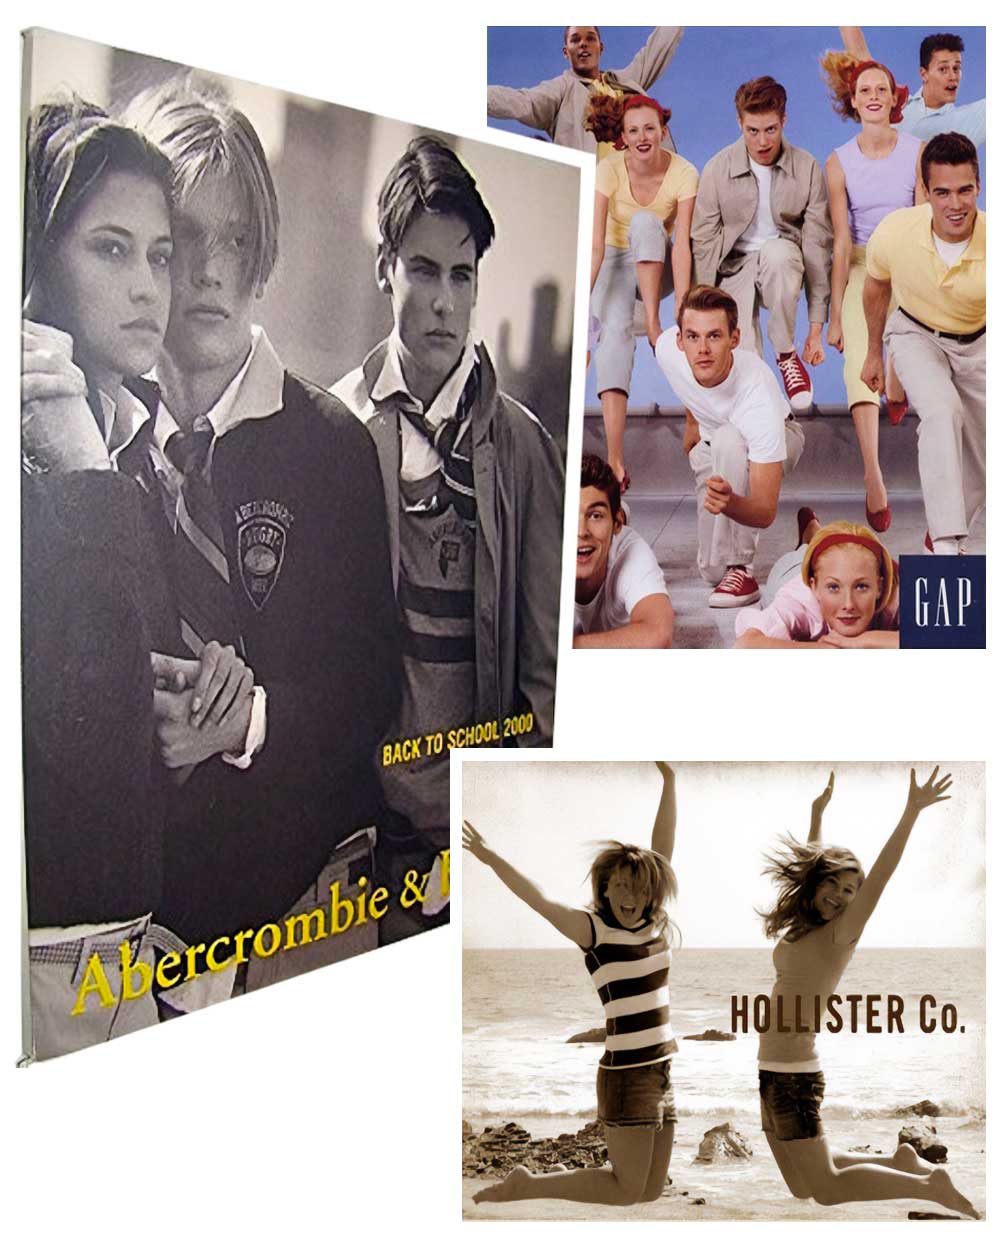 2000s fashion retailers adverts. Abercrombie & Fitch. Gap. Hollister